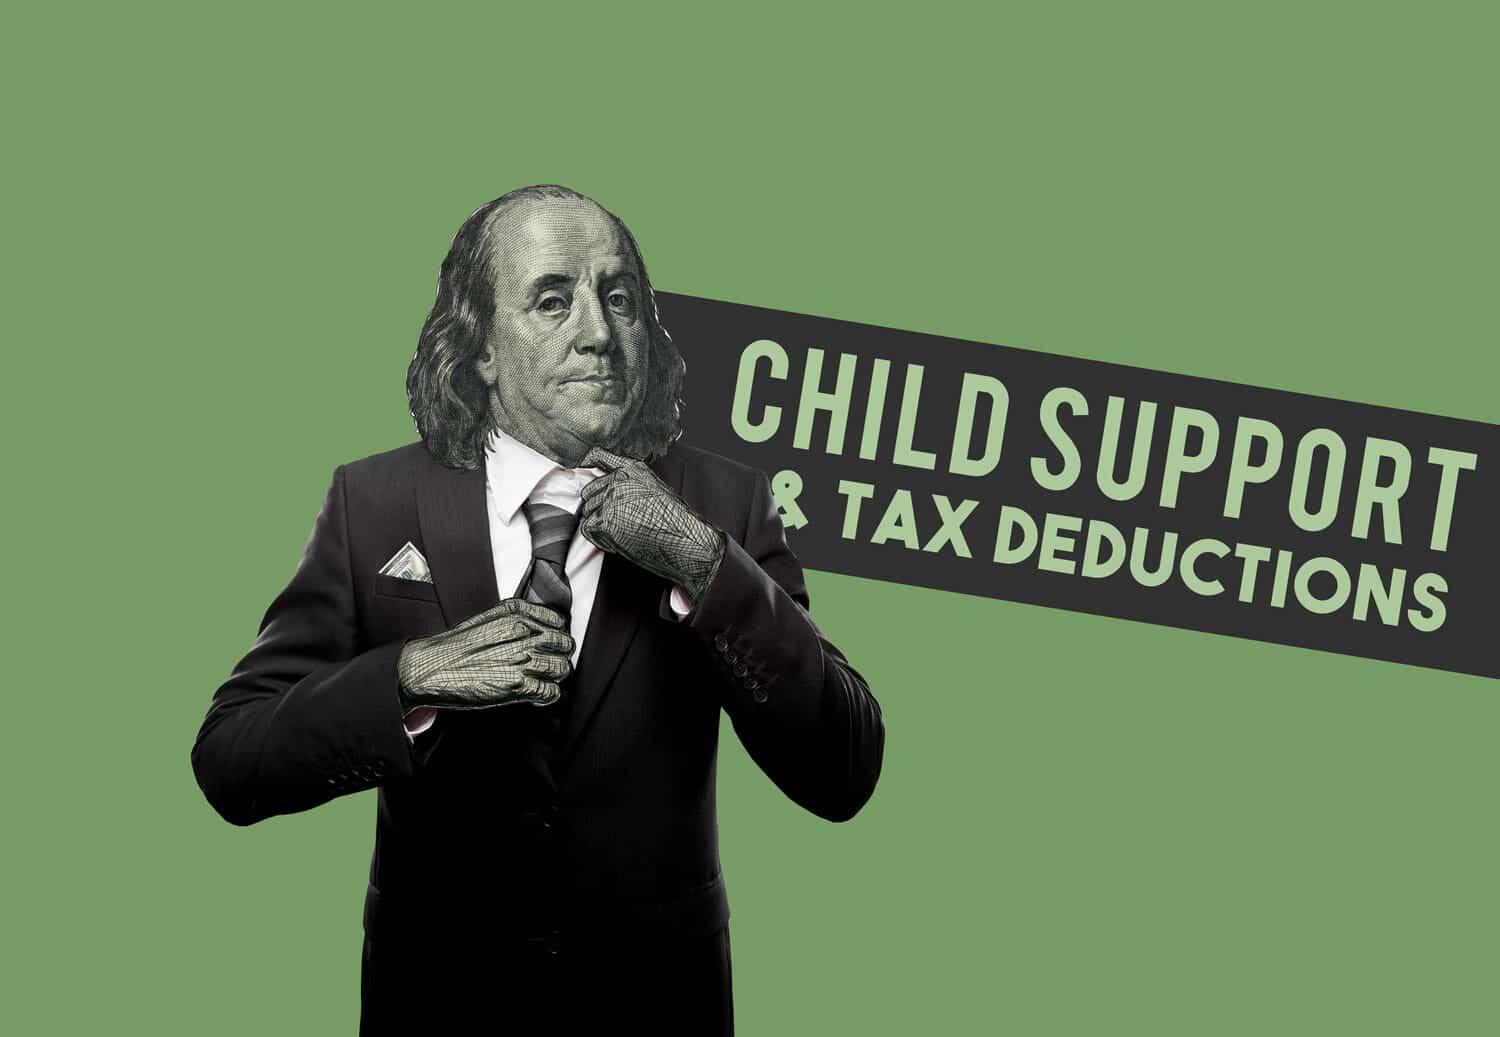 Child Support Tax Deduction